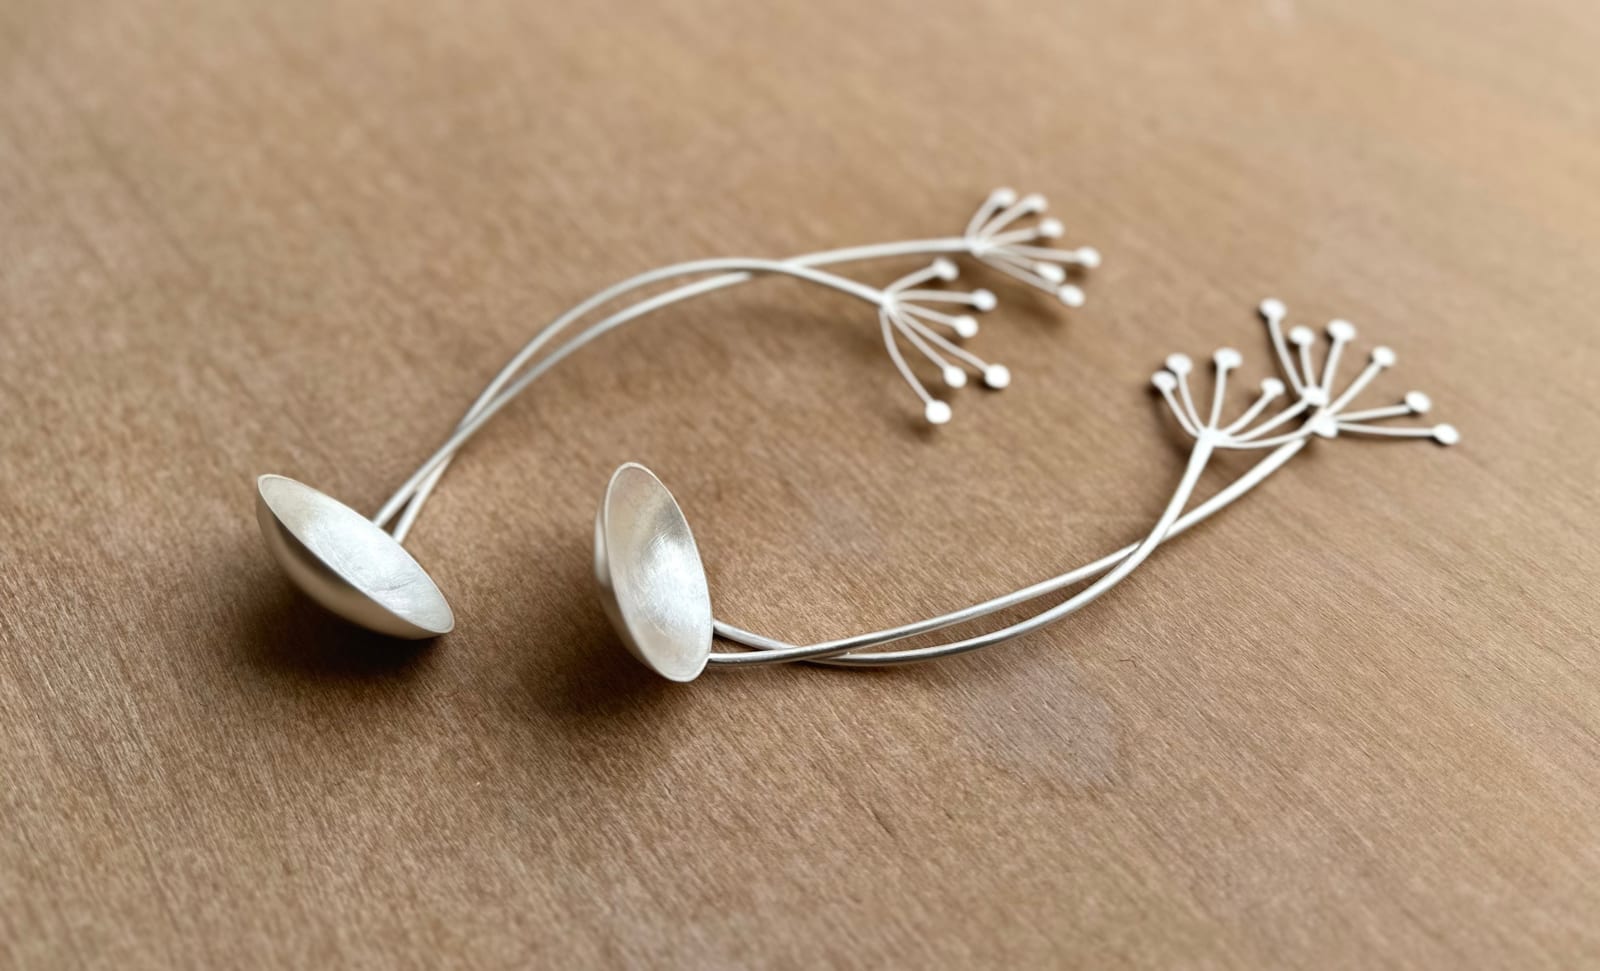 Lucy Woodley, Seed Head Spoon - Left Leaning, 2024